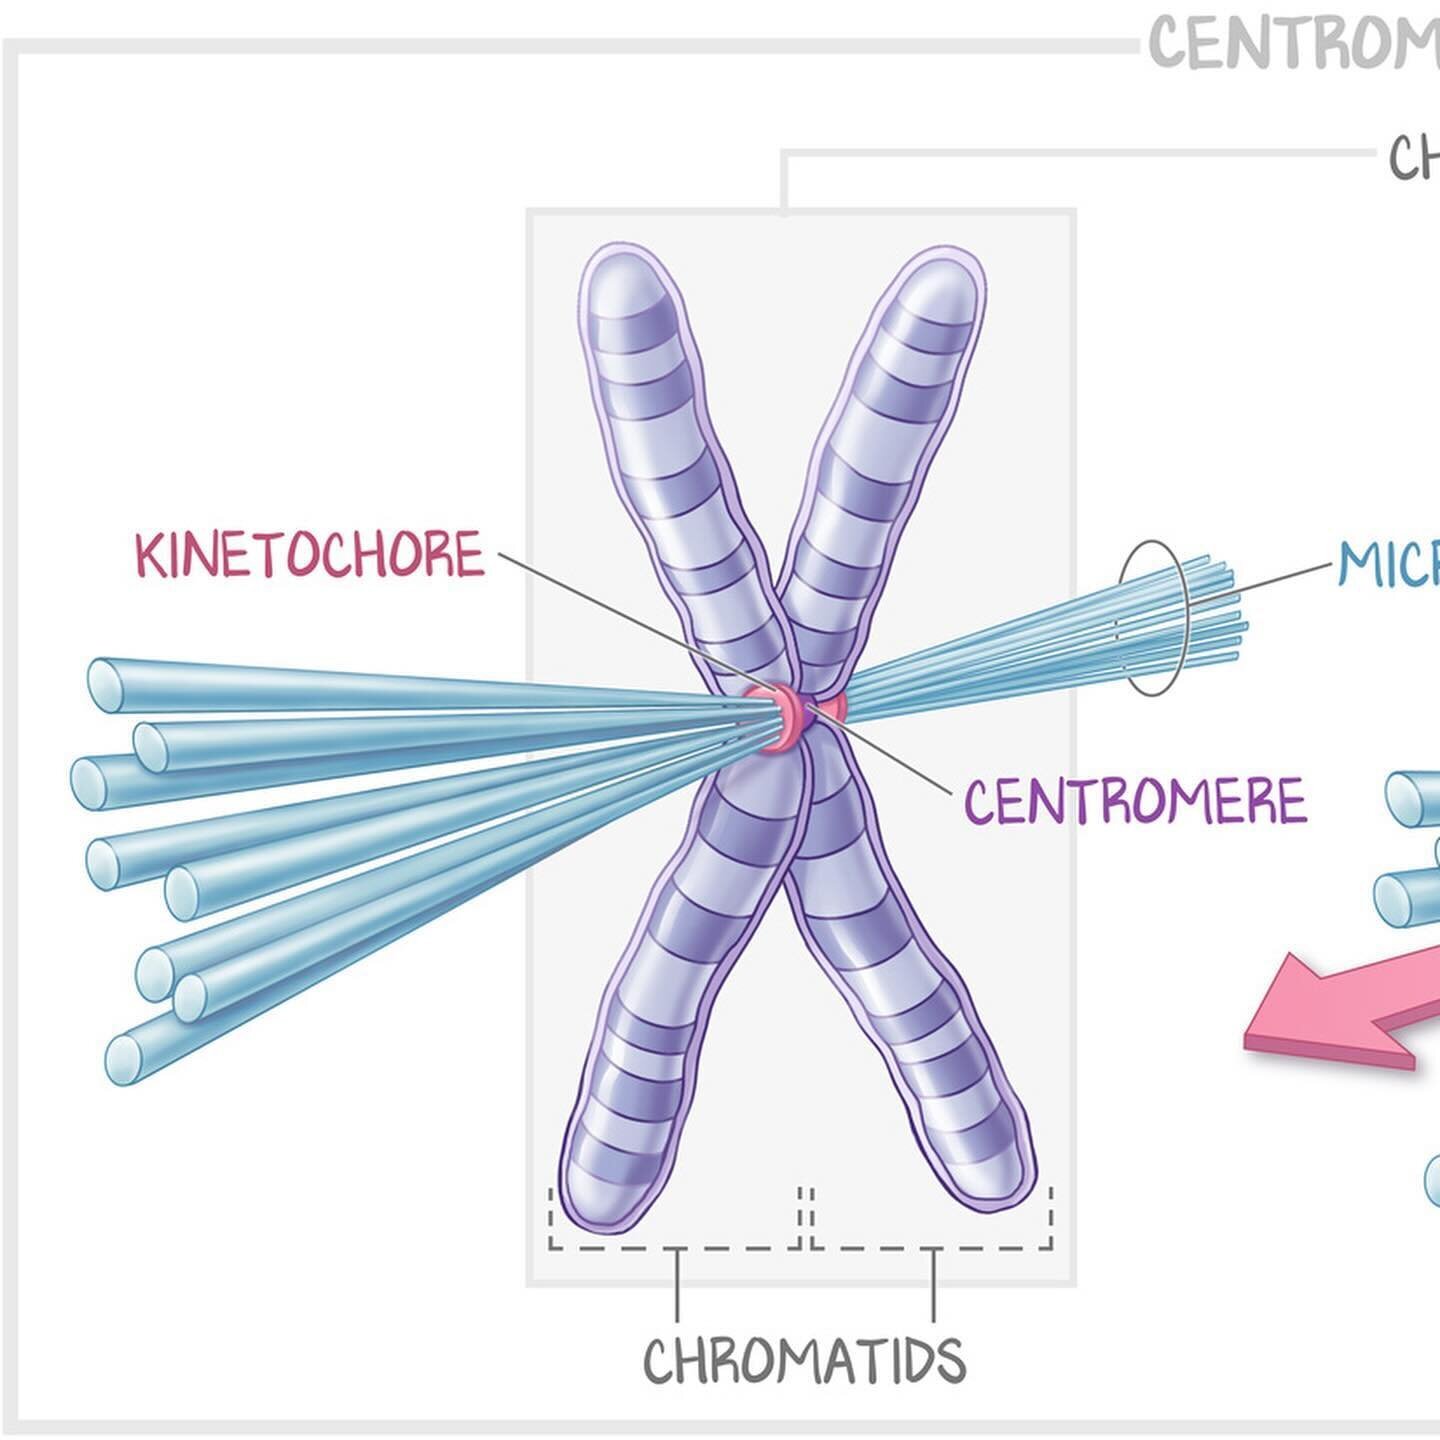 To continue with the mitosis illustrations, this one explains centromere vocabulary for medical education. The centromere is located between the two sister chromatids, holding them together. The kinetochore attaches the centromeres to the microtubule